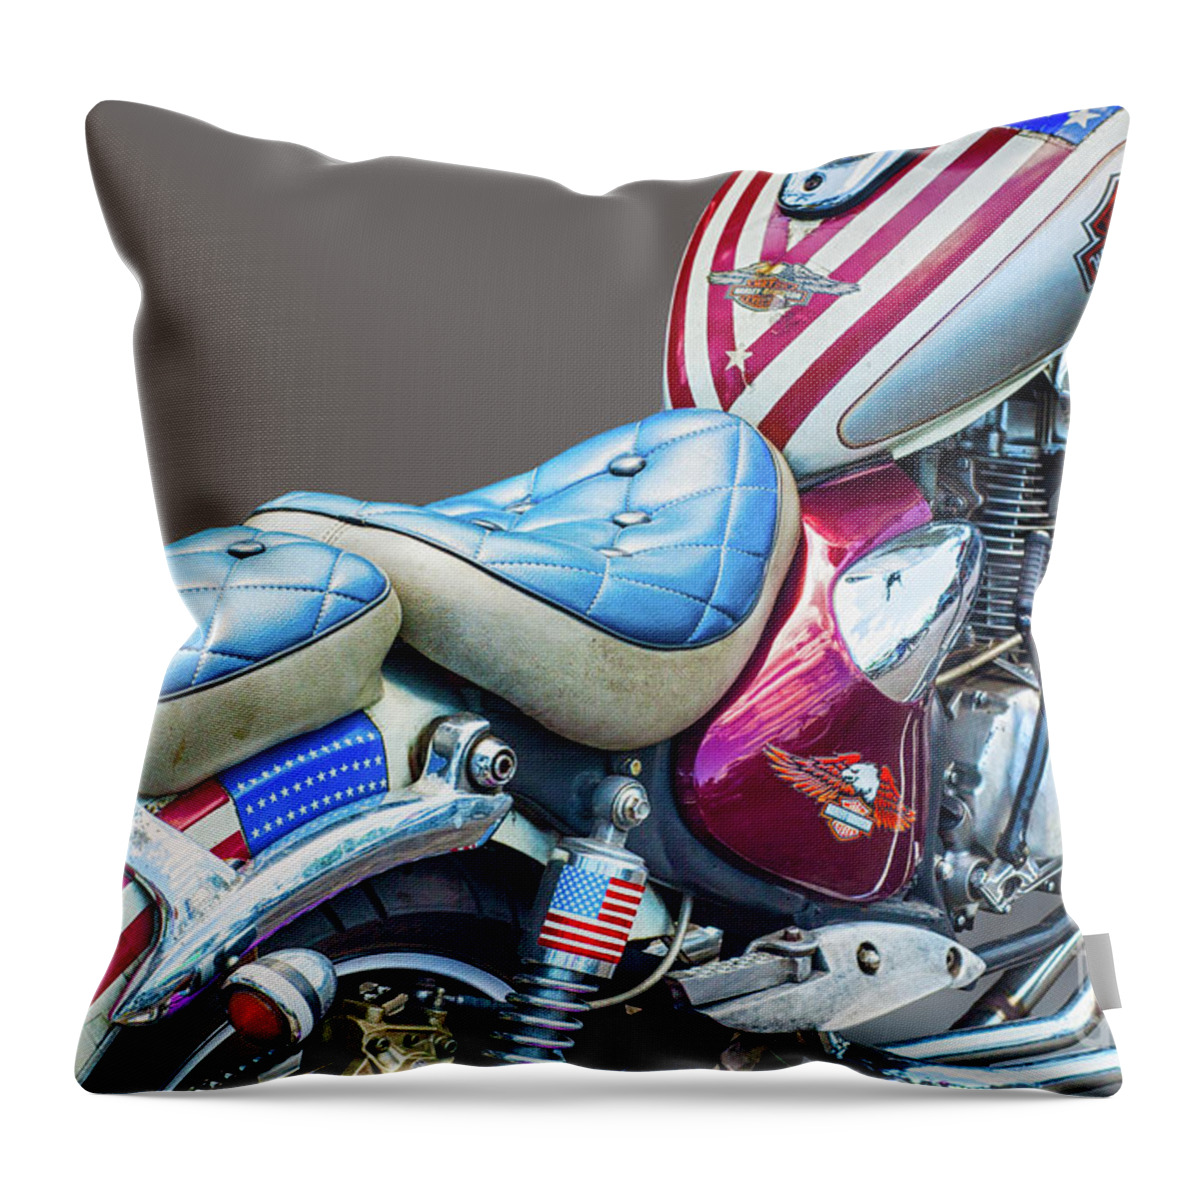 Harley Davidson Throw Pillow featuring the photograph Harley by Charuhas Images